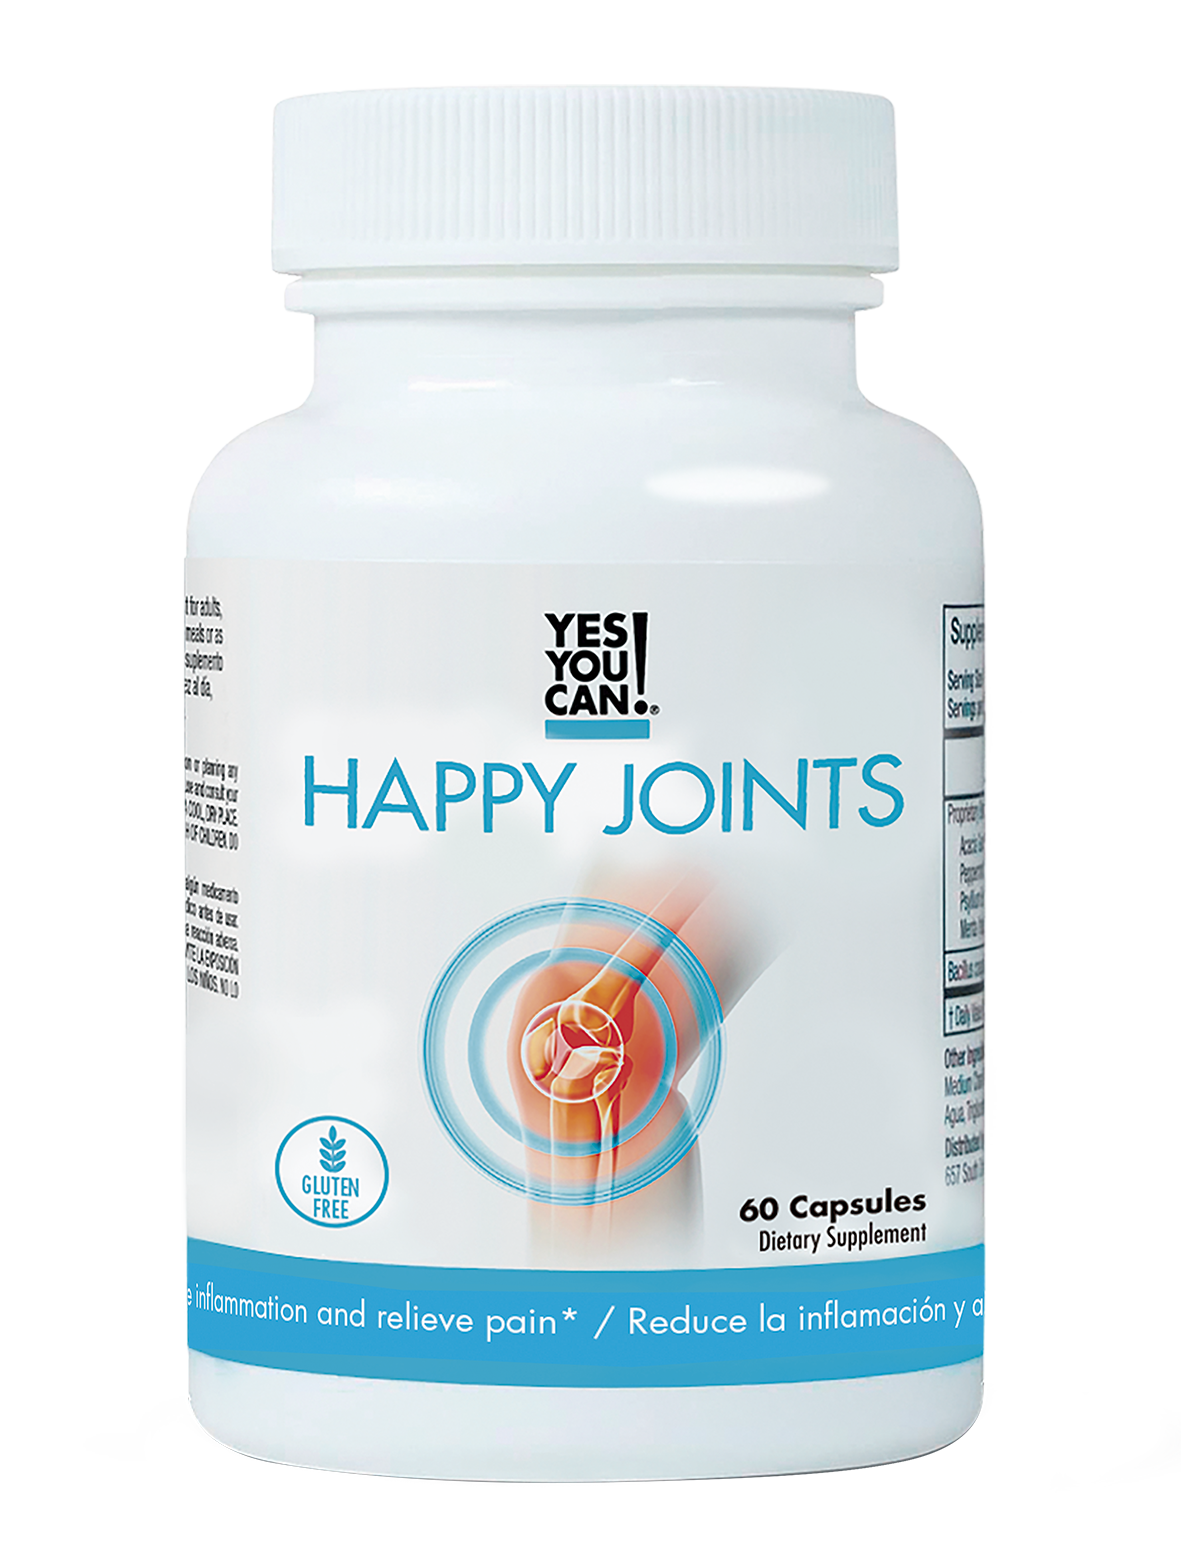 FREE Happy Joints